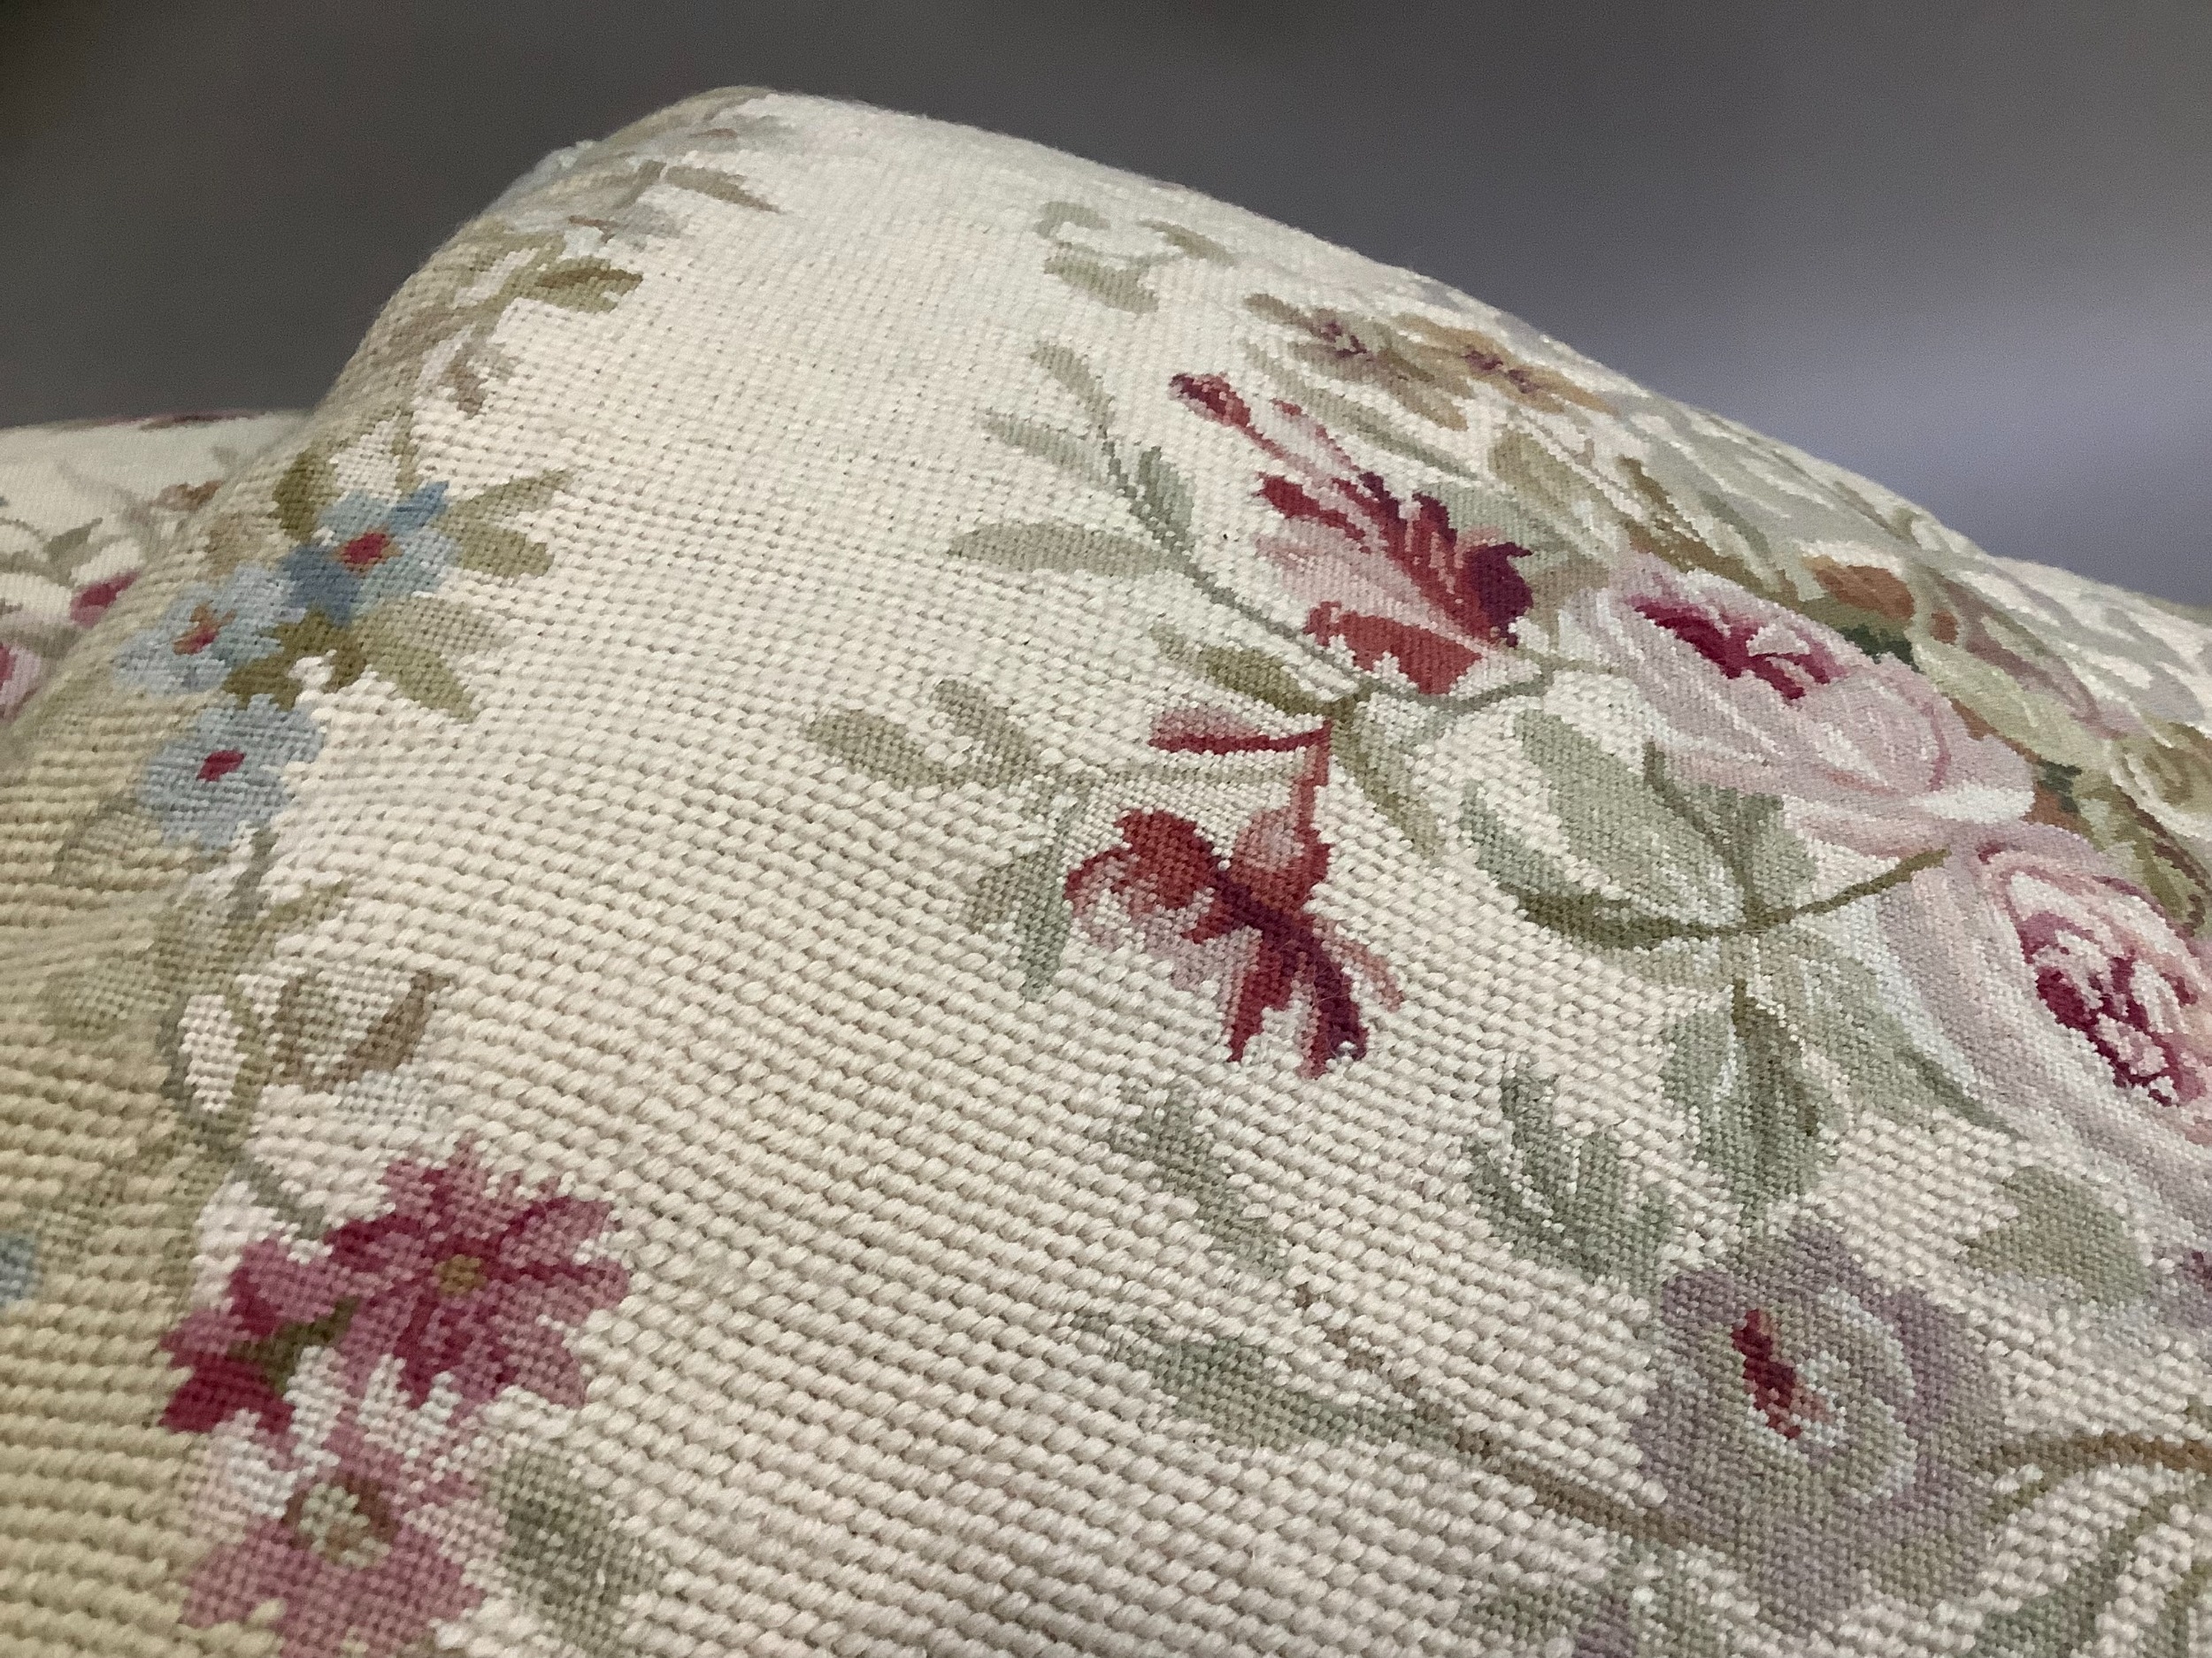 Two Chelsea Textile petit and gros point cushions, ribbon-tied summer flowers in shades of pink - Image 2 of 4